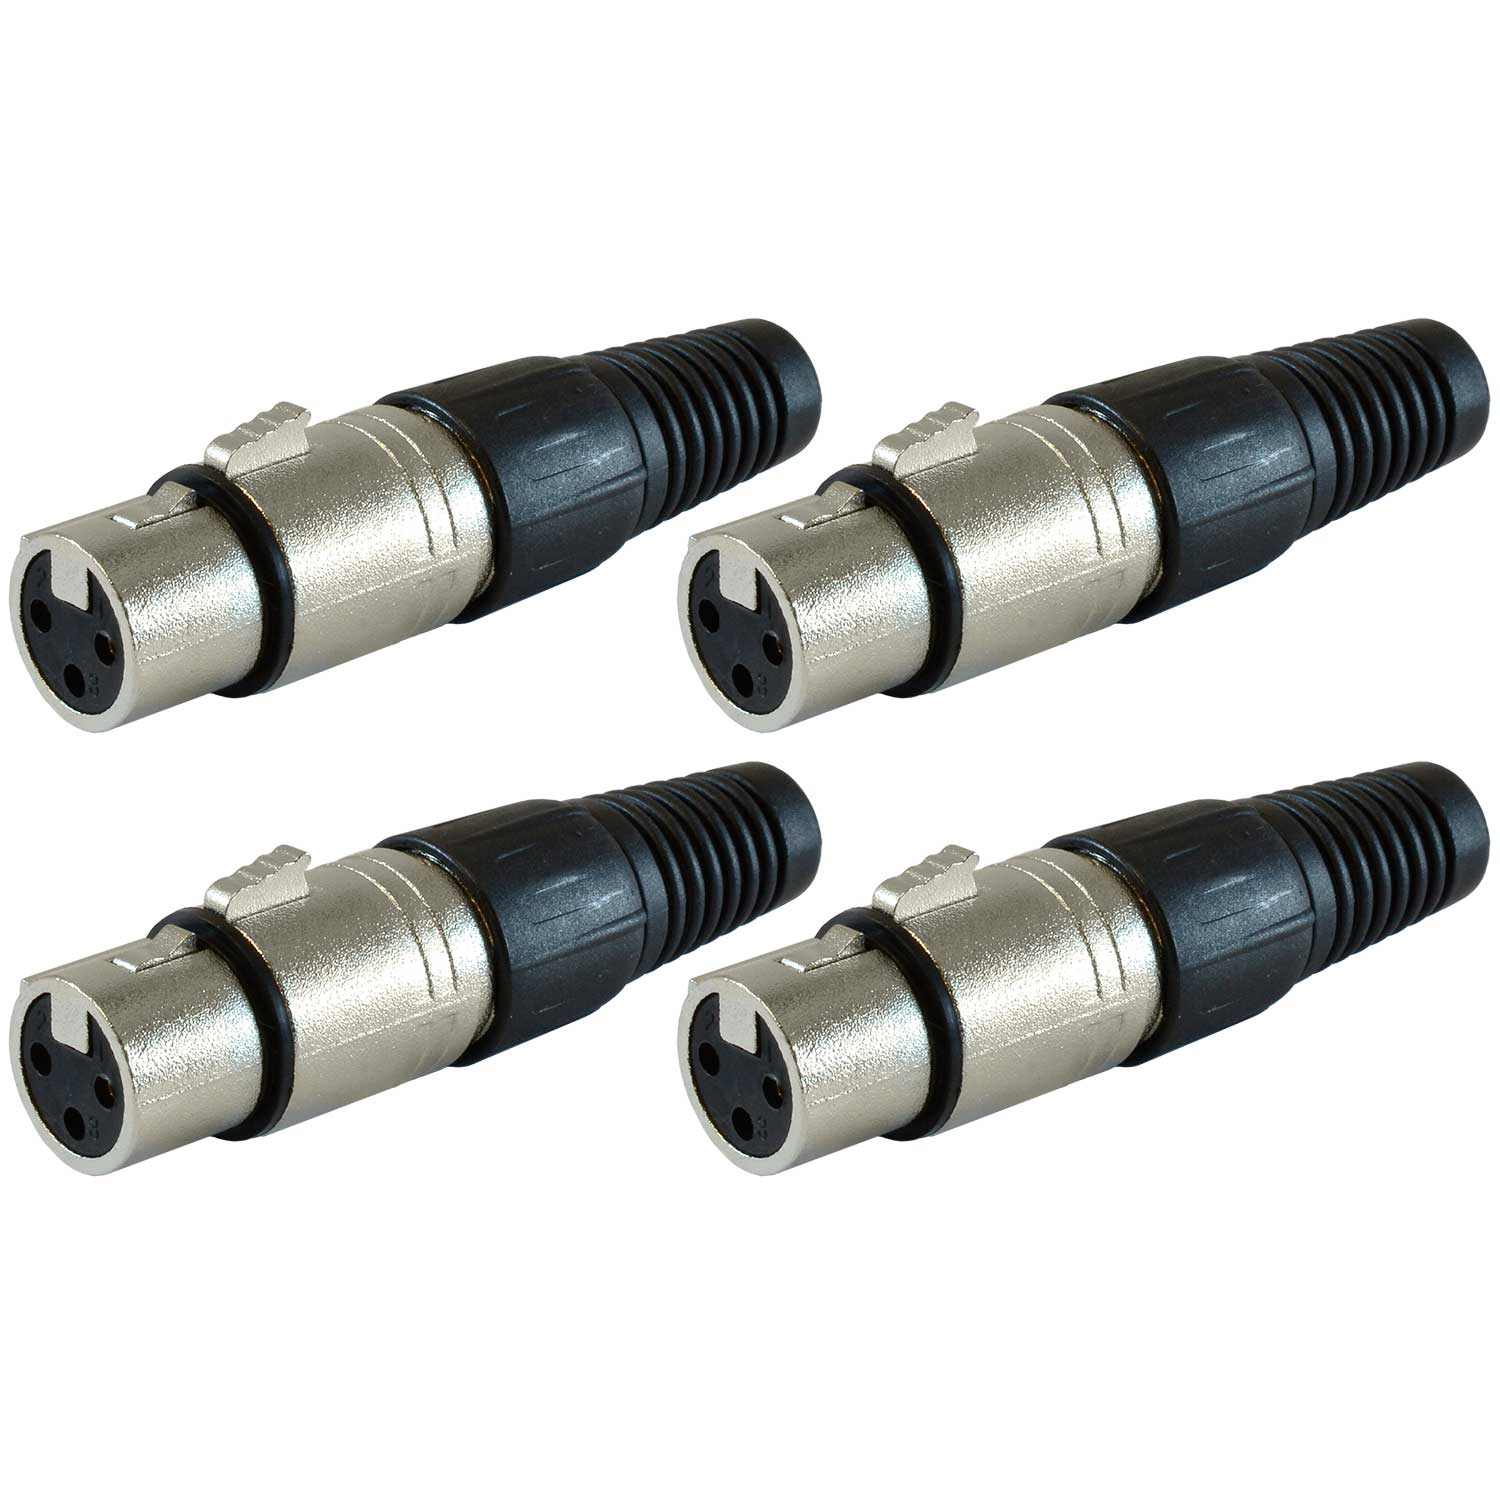 GLS Audio XLR Cable Mount Connector Plugs - Female 4 Pack